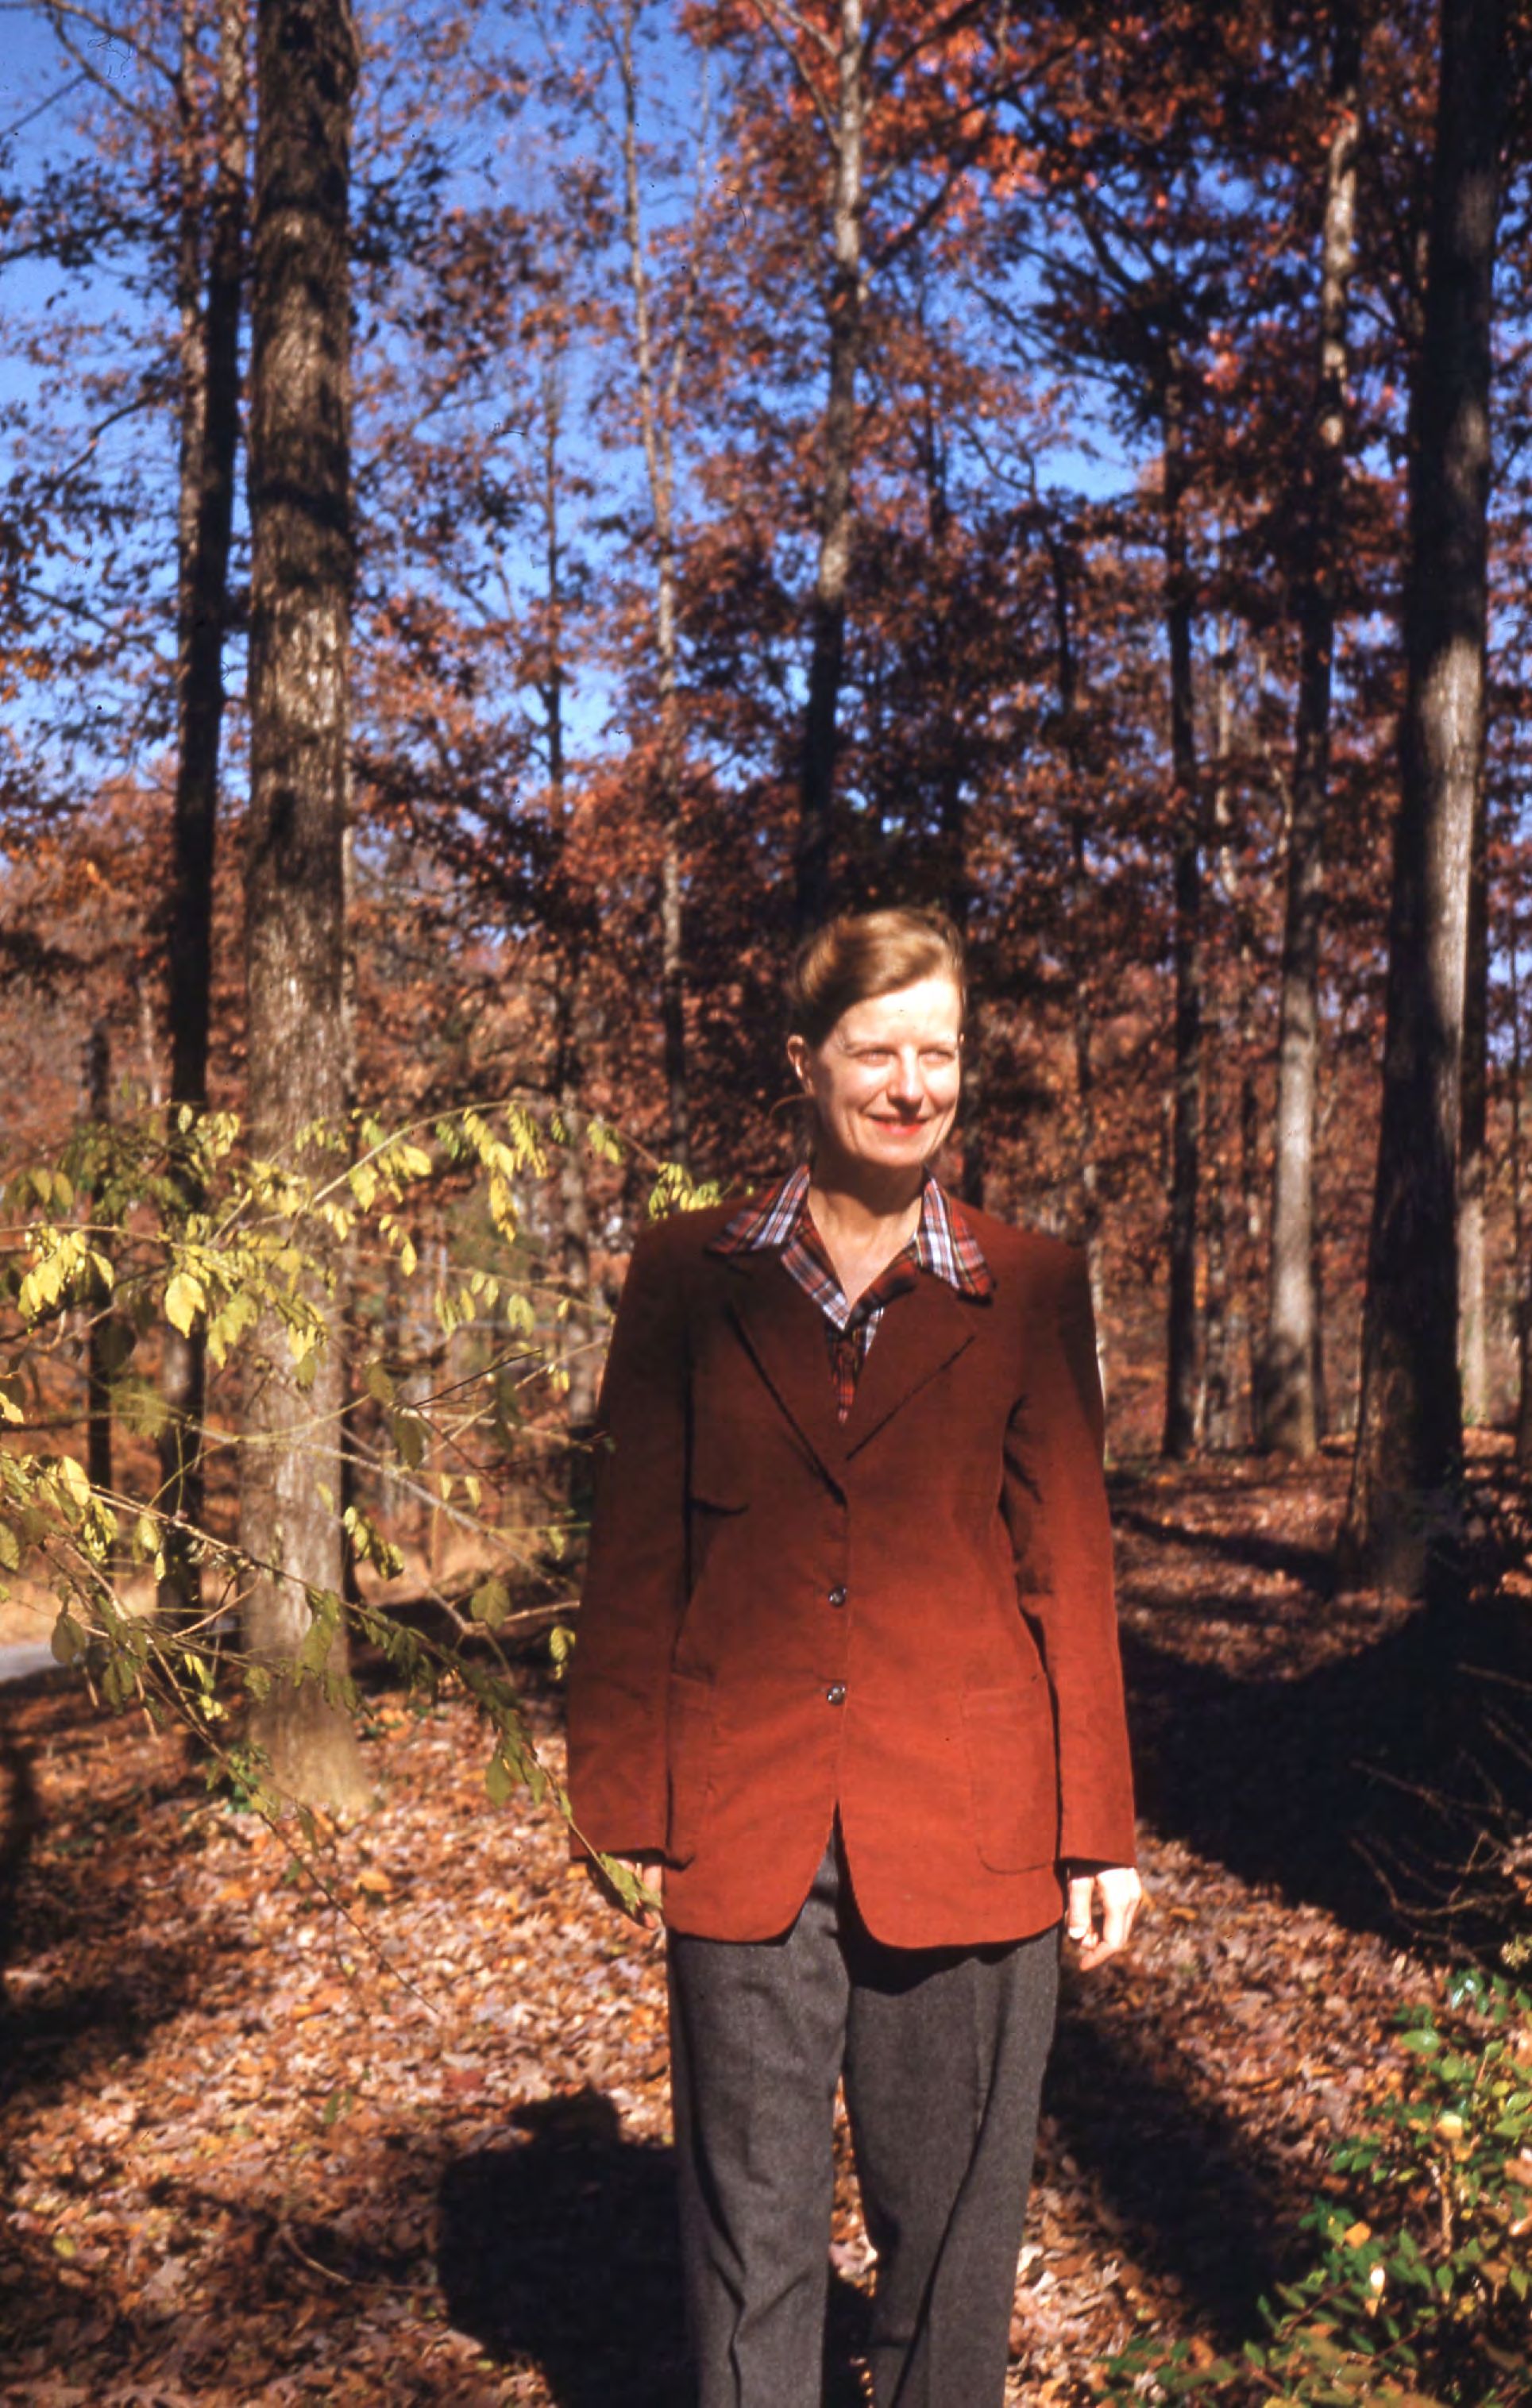 Photograph of woman in woods [JPG]